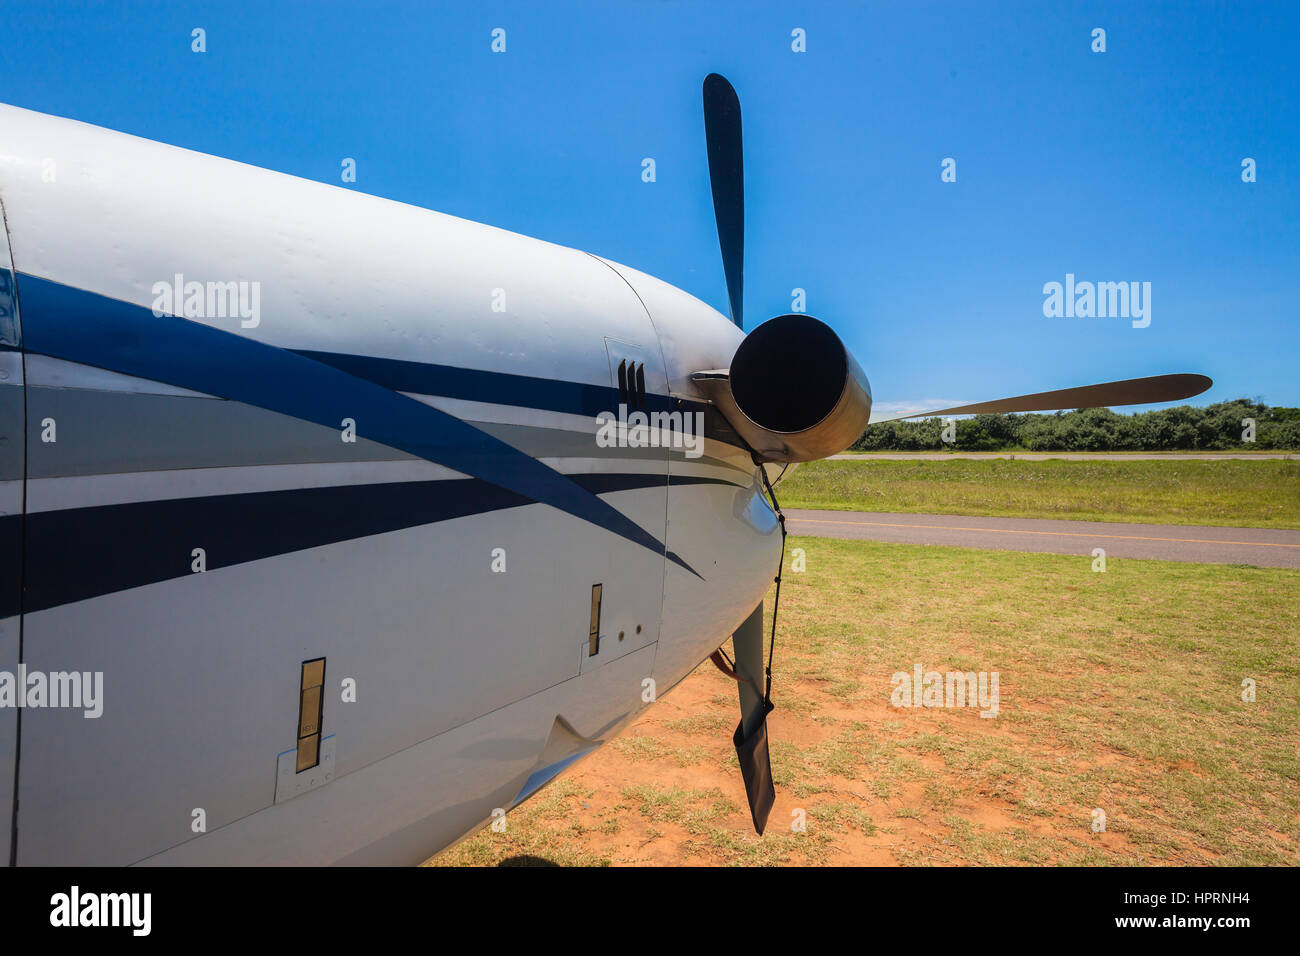 Plane twin engine propellor aircraft closeup rear front abstract on countryside airstrip summers day Stock Photo